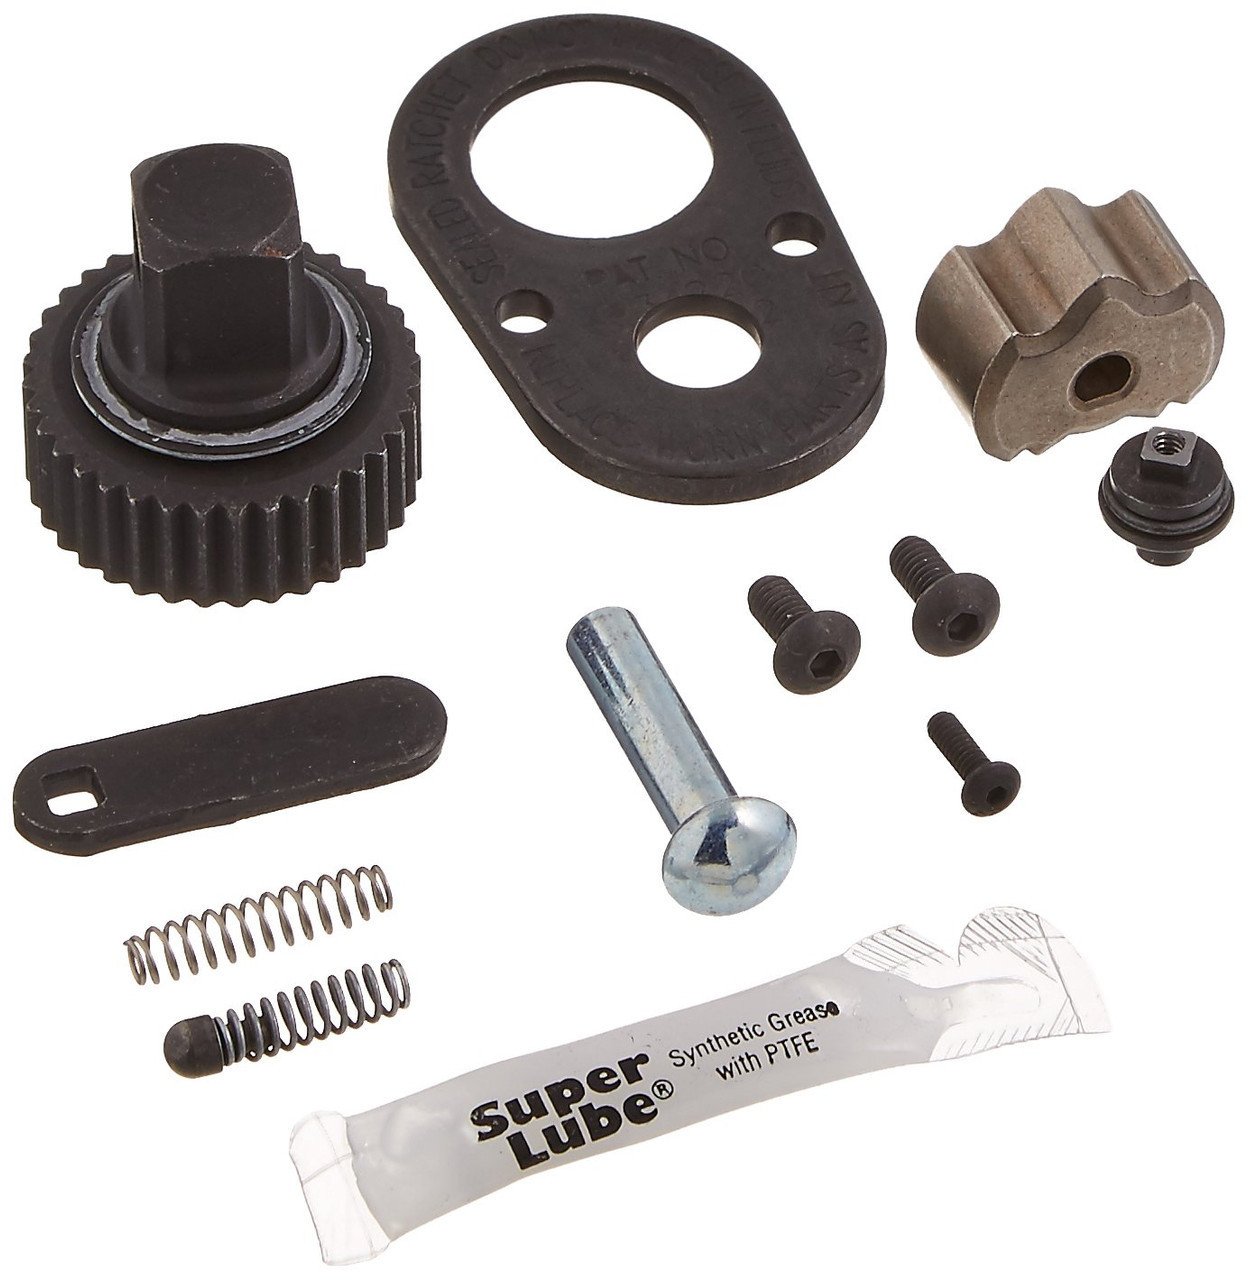 Ratchet Repair Kit for the Williams Scaffold Ratchet Wrench - BS-63BRK